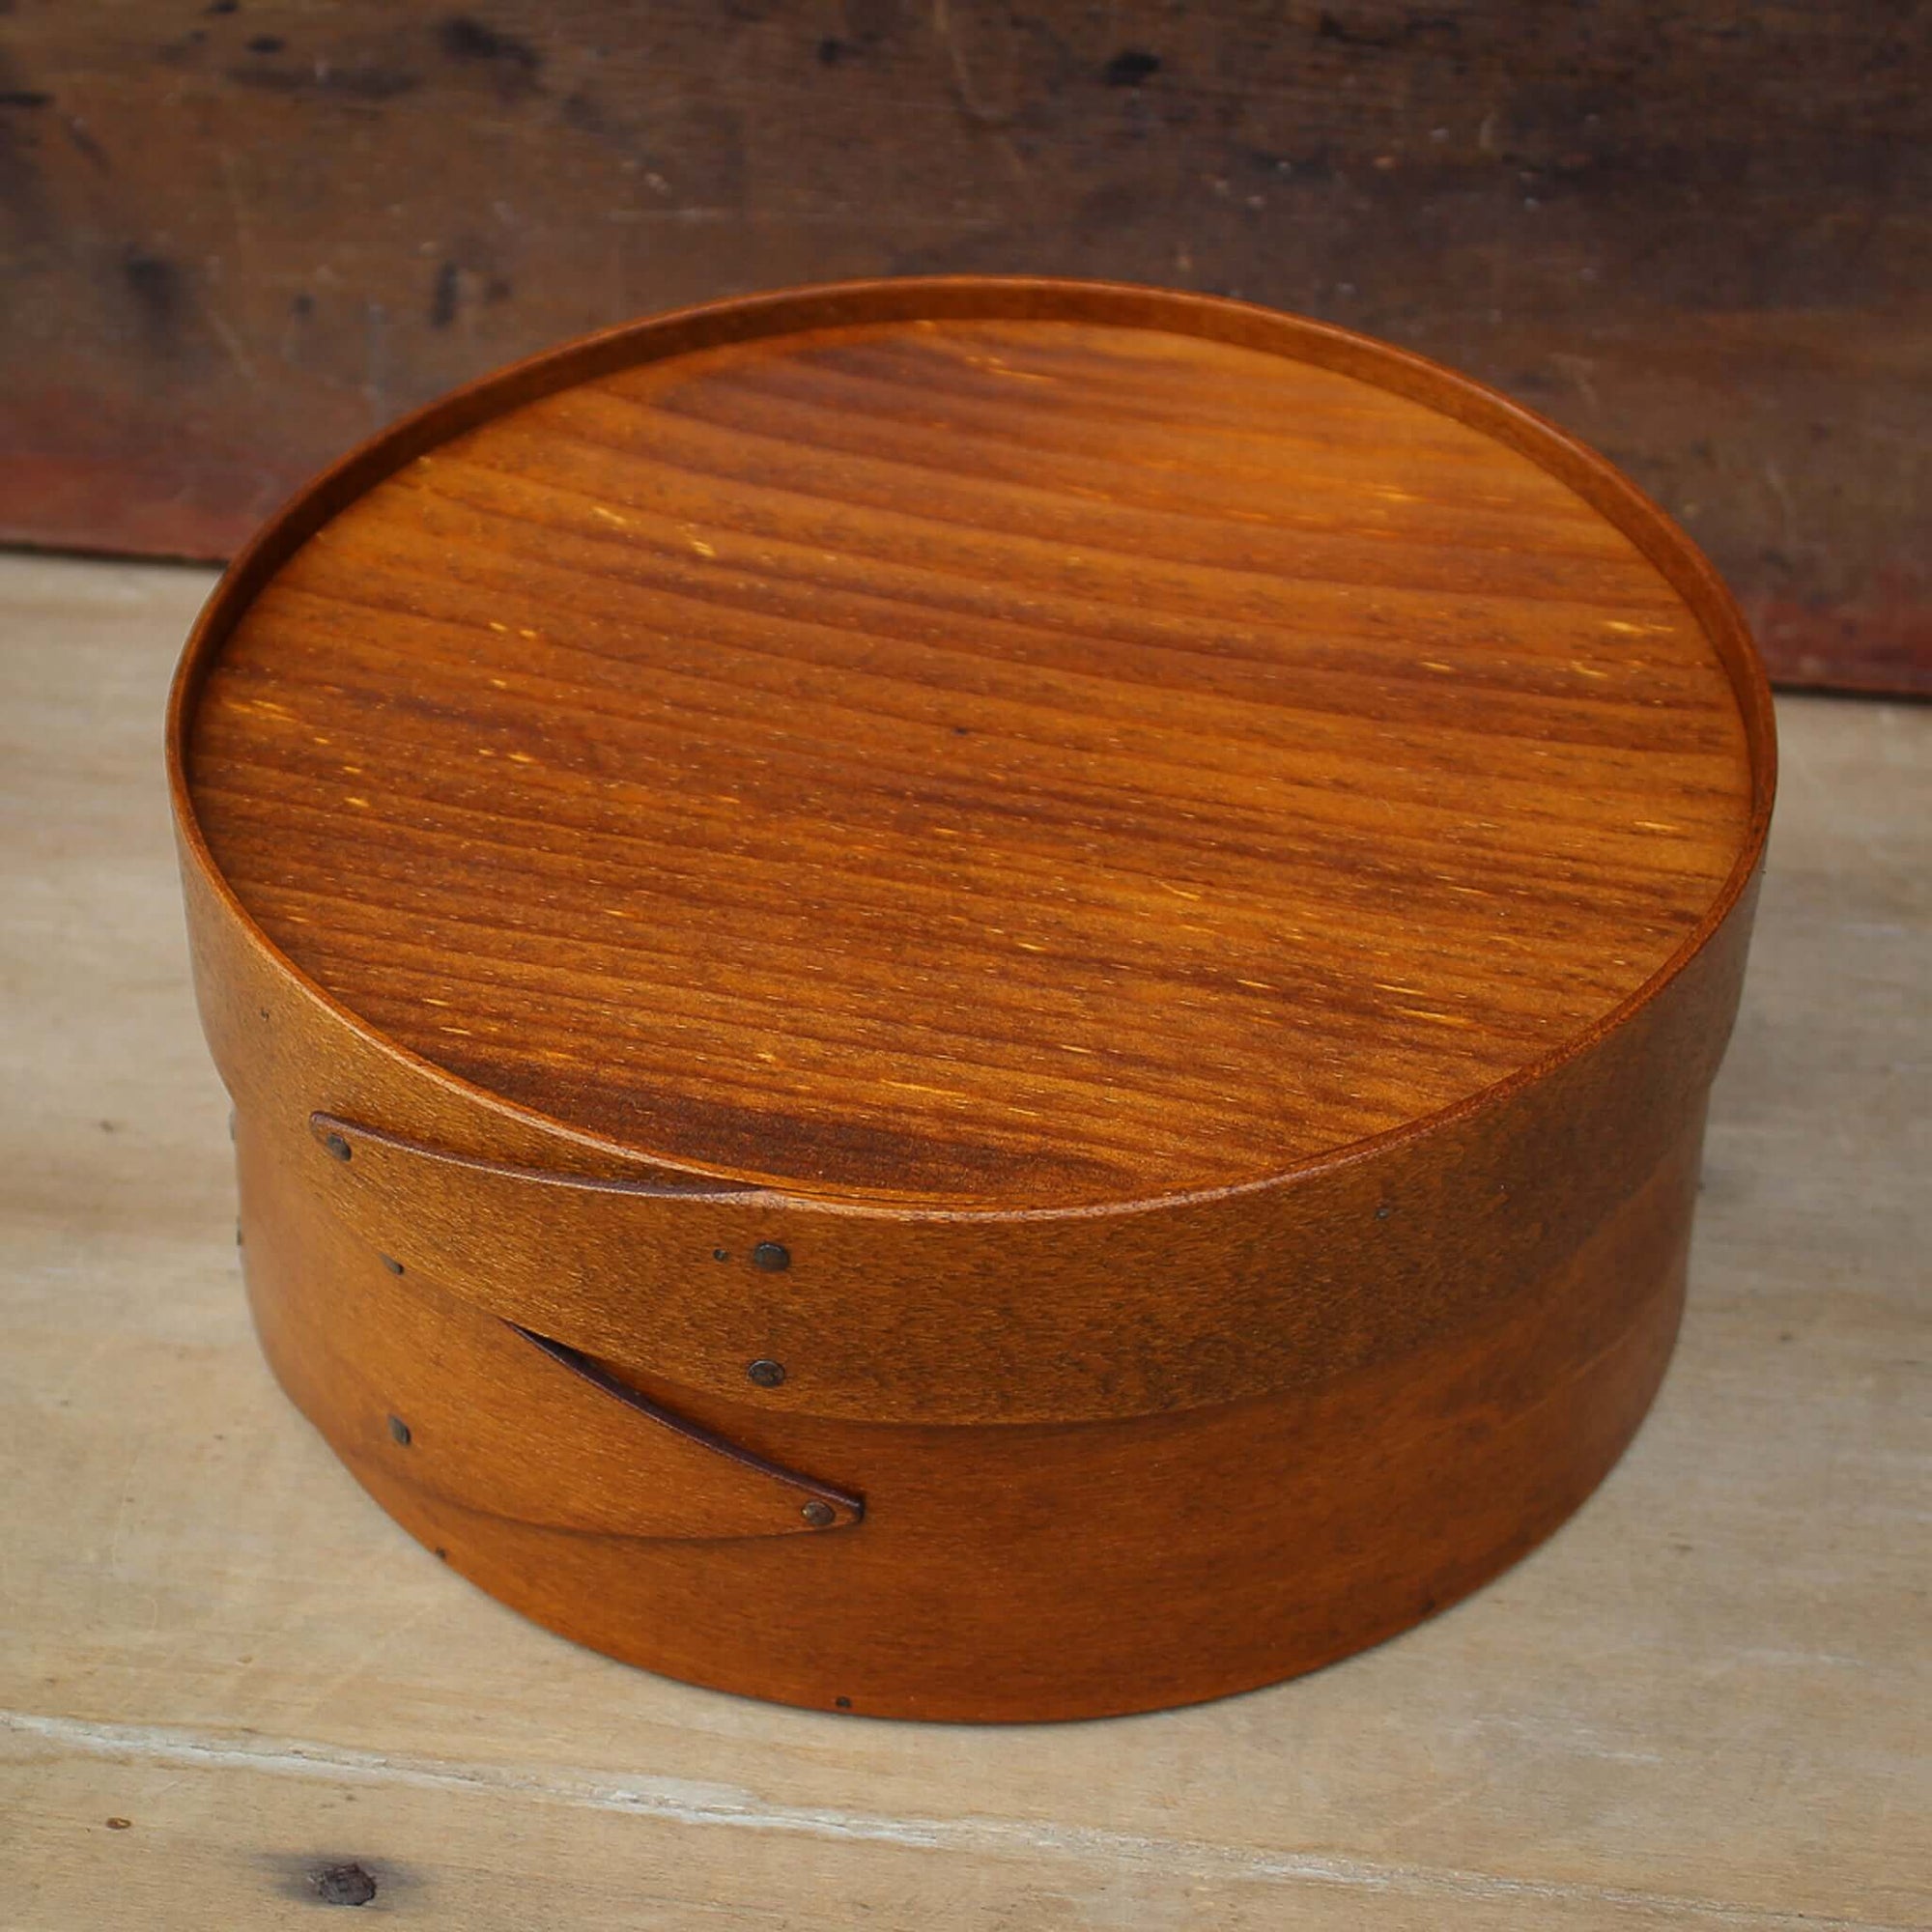 Shaker Style Recessed Lid Box, LeHay's Shaker Boxes